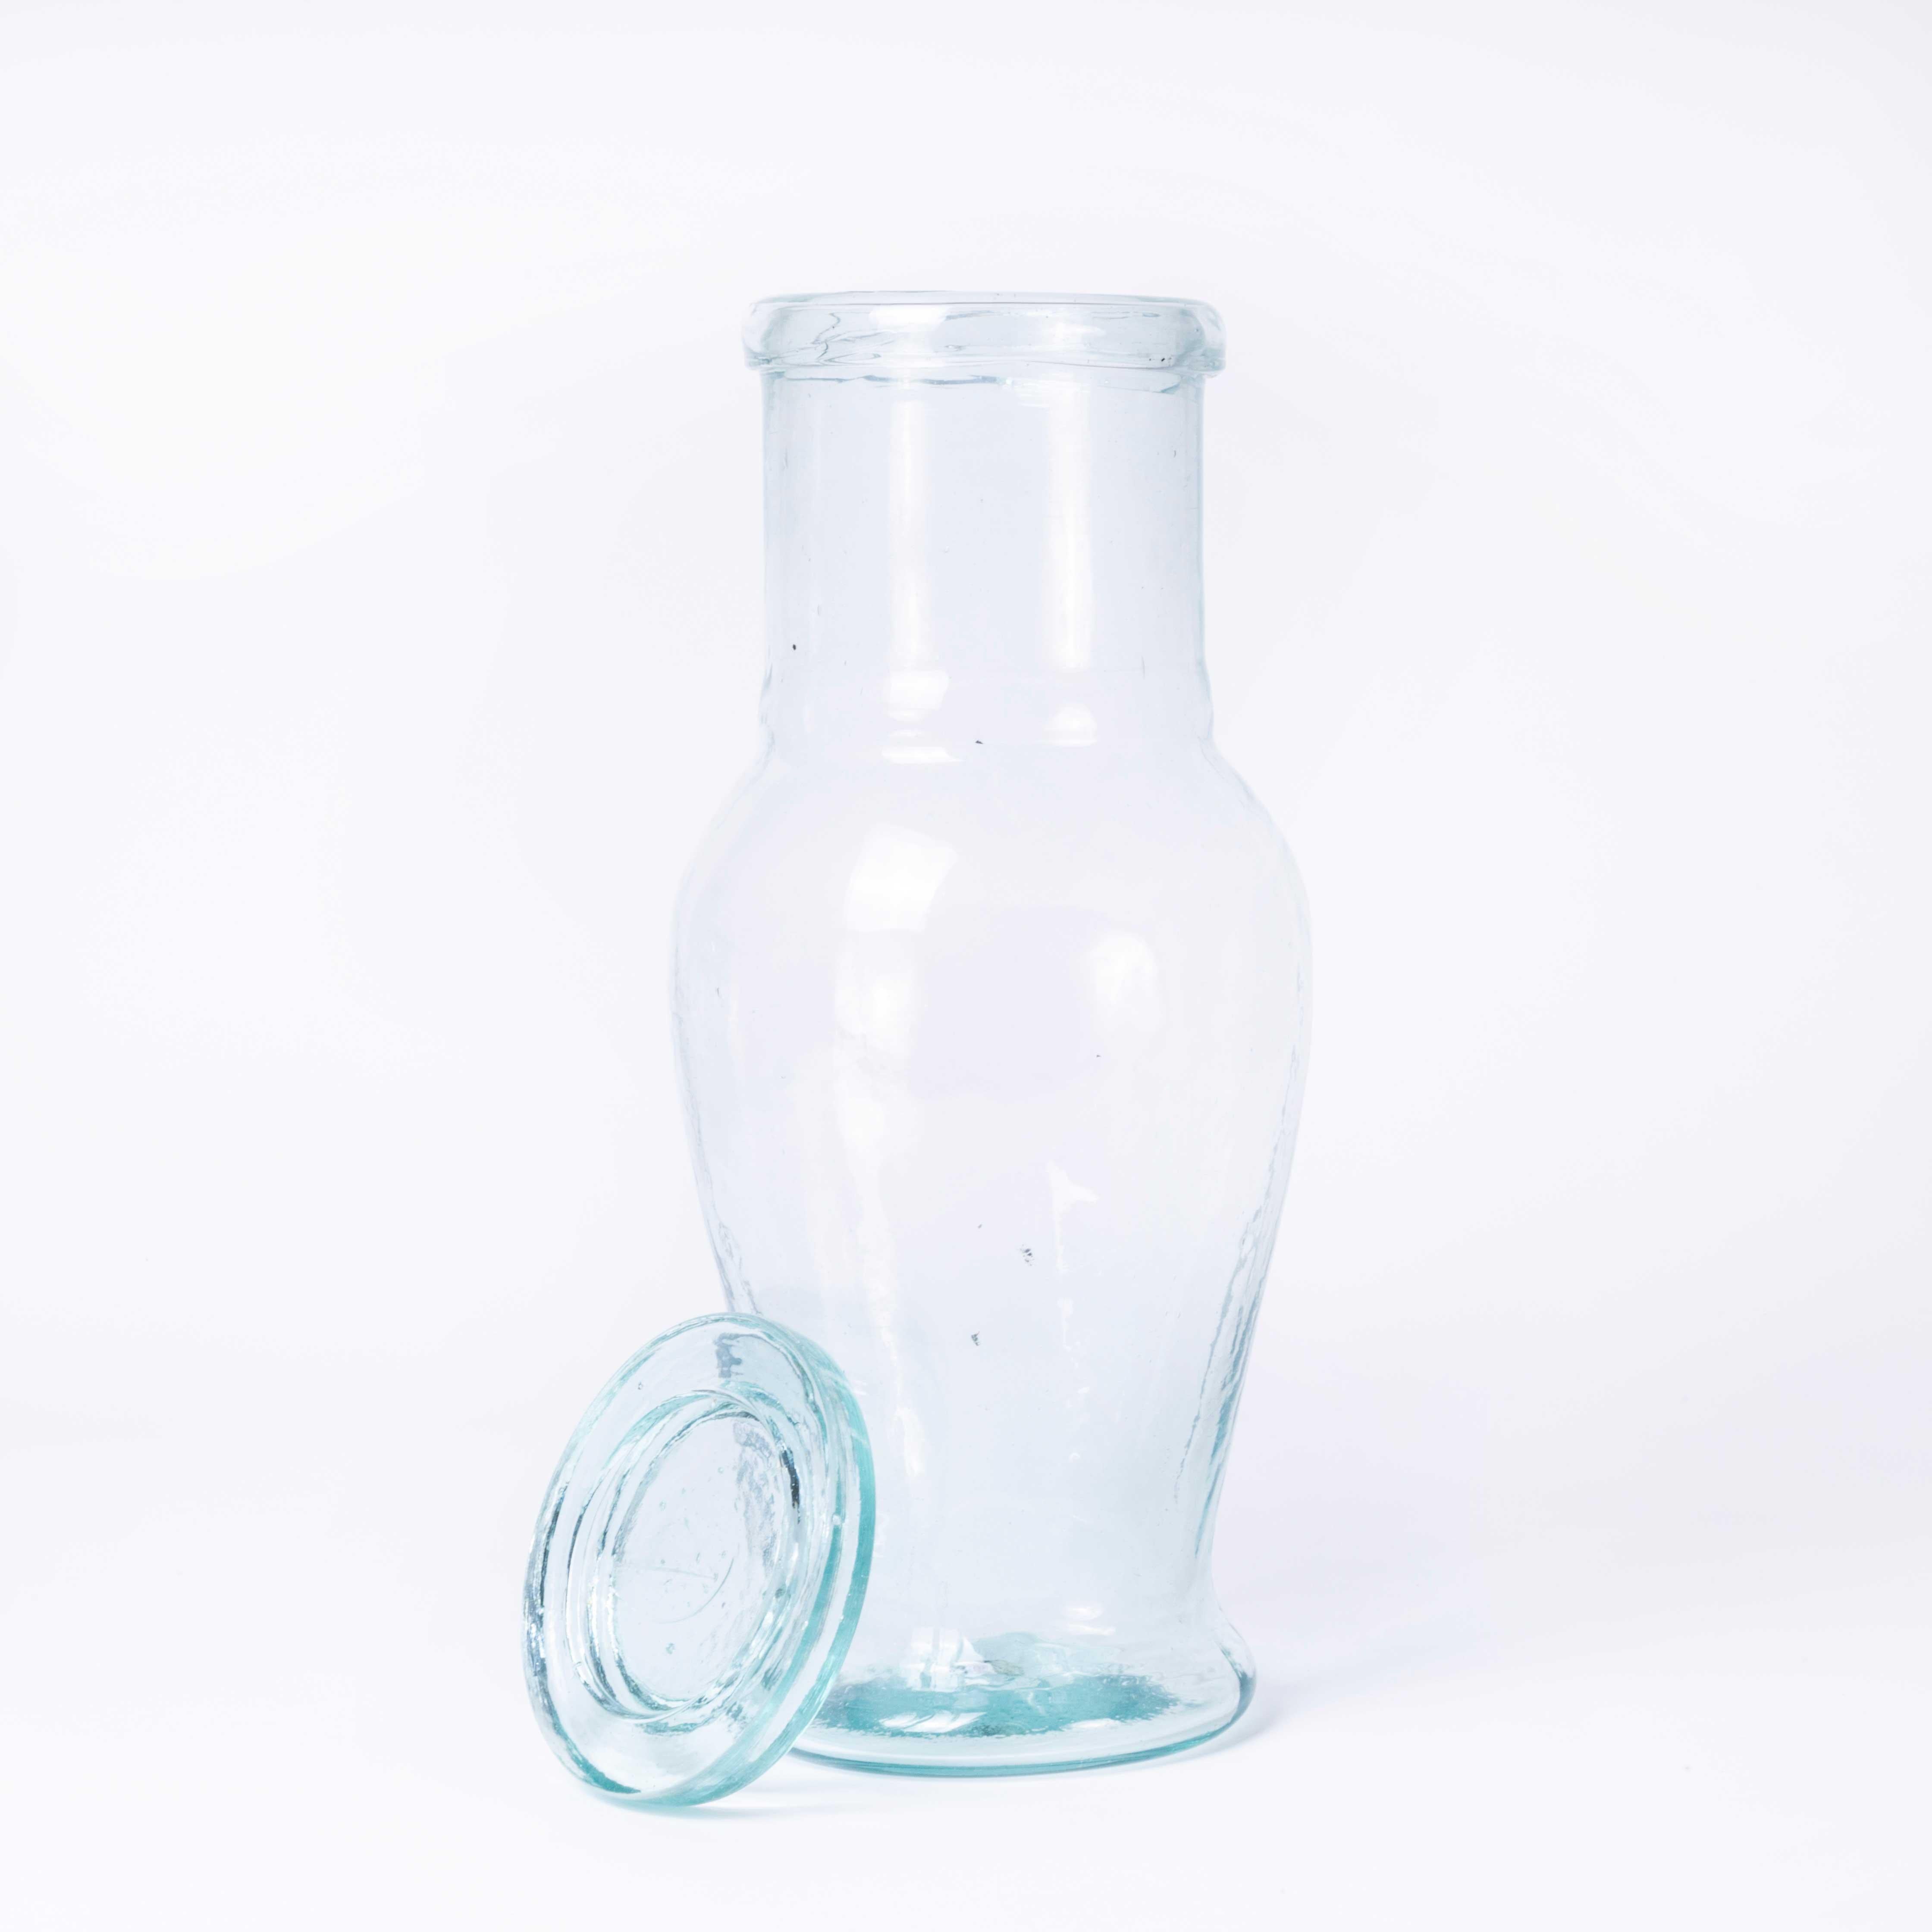 Contemporary Moroccan glass jar – Clear
Contemporary Moroccan glass jar – Clear. Hand-made in Morocco. The glass is mouth blown and available in an assortment of colours. Each jar comes with a heavy lid. Superb artisan quality. Listing is for one